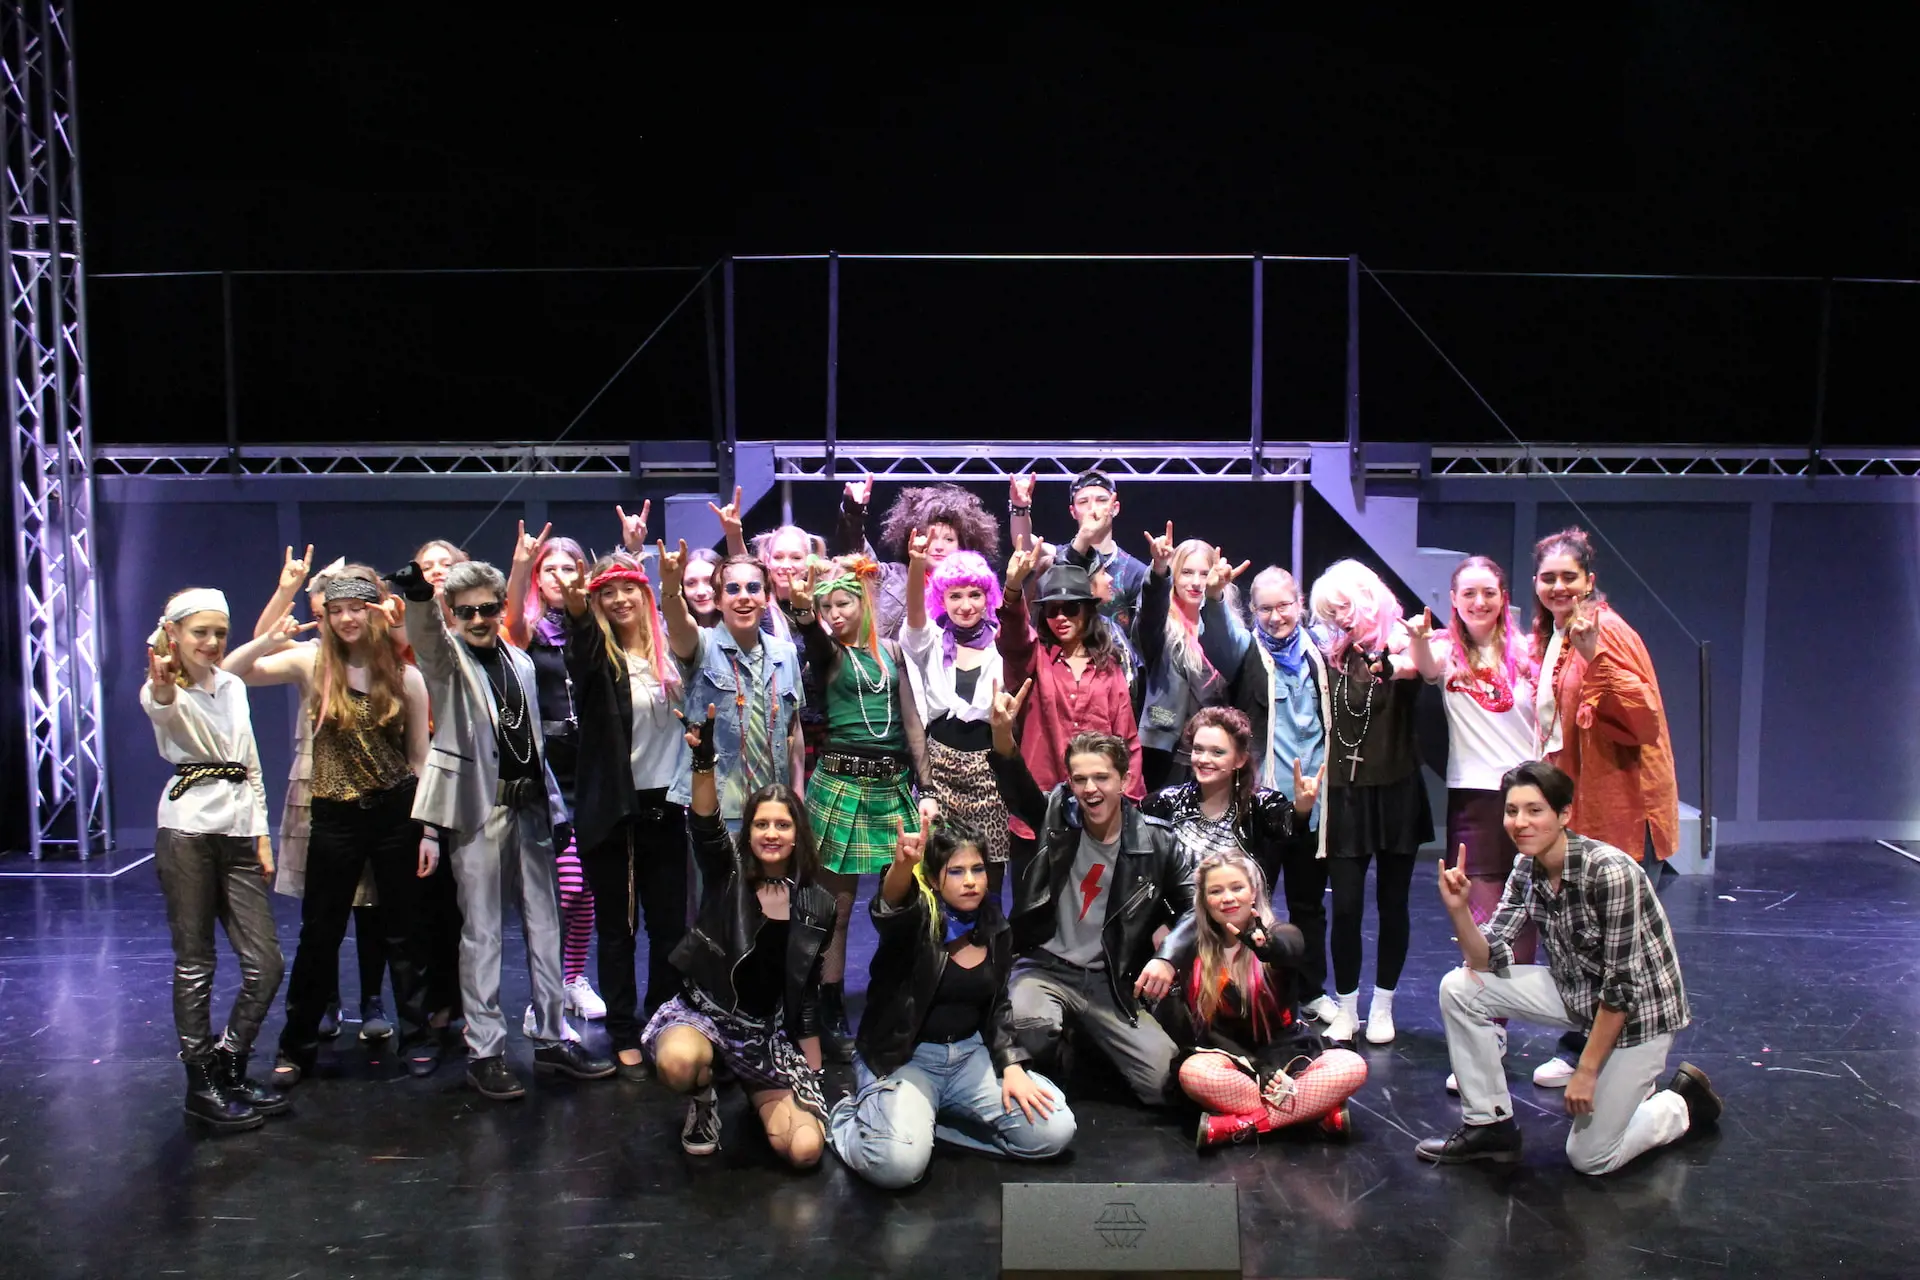 Senior pupils group photo of their drama production at Ibstock Place School, a private school near Richmond, Barnes, Putney, Kingston, and Wandsworth.